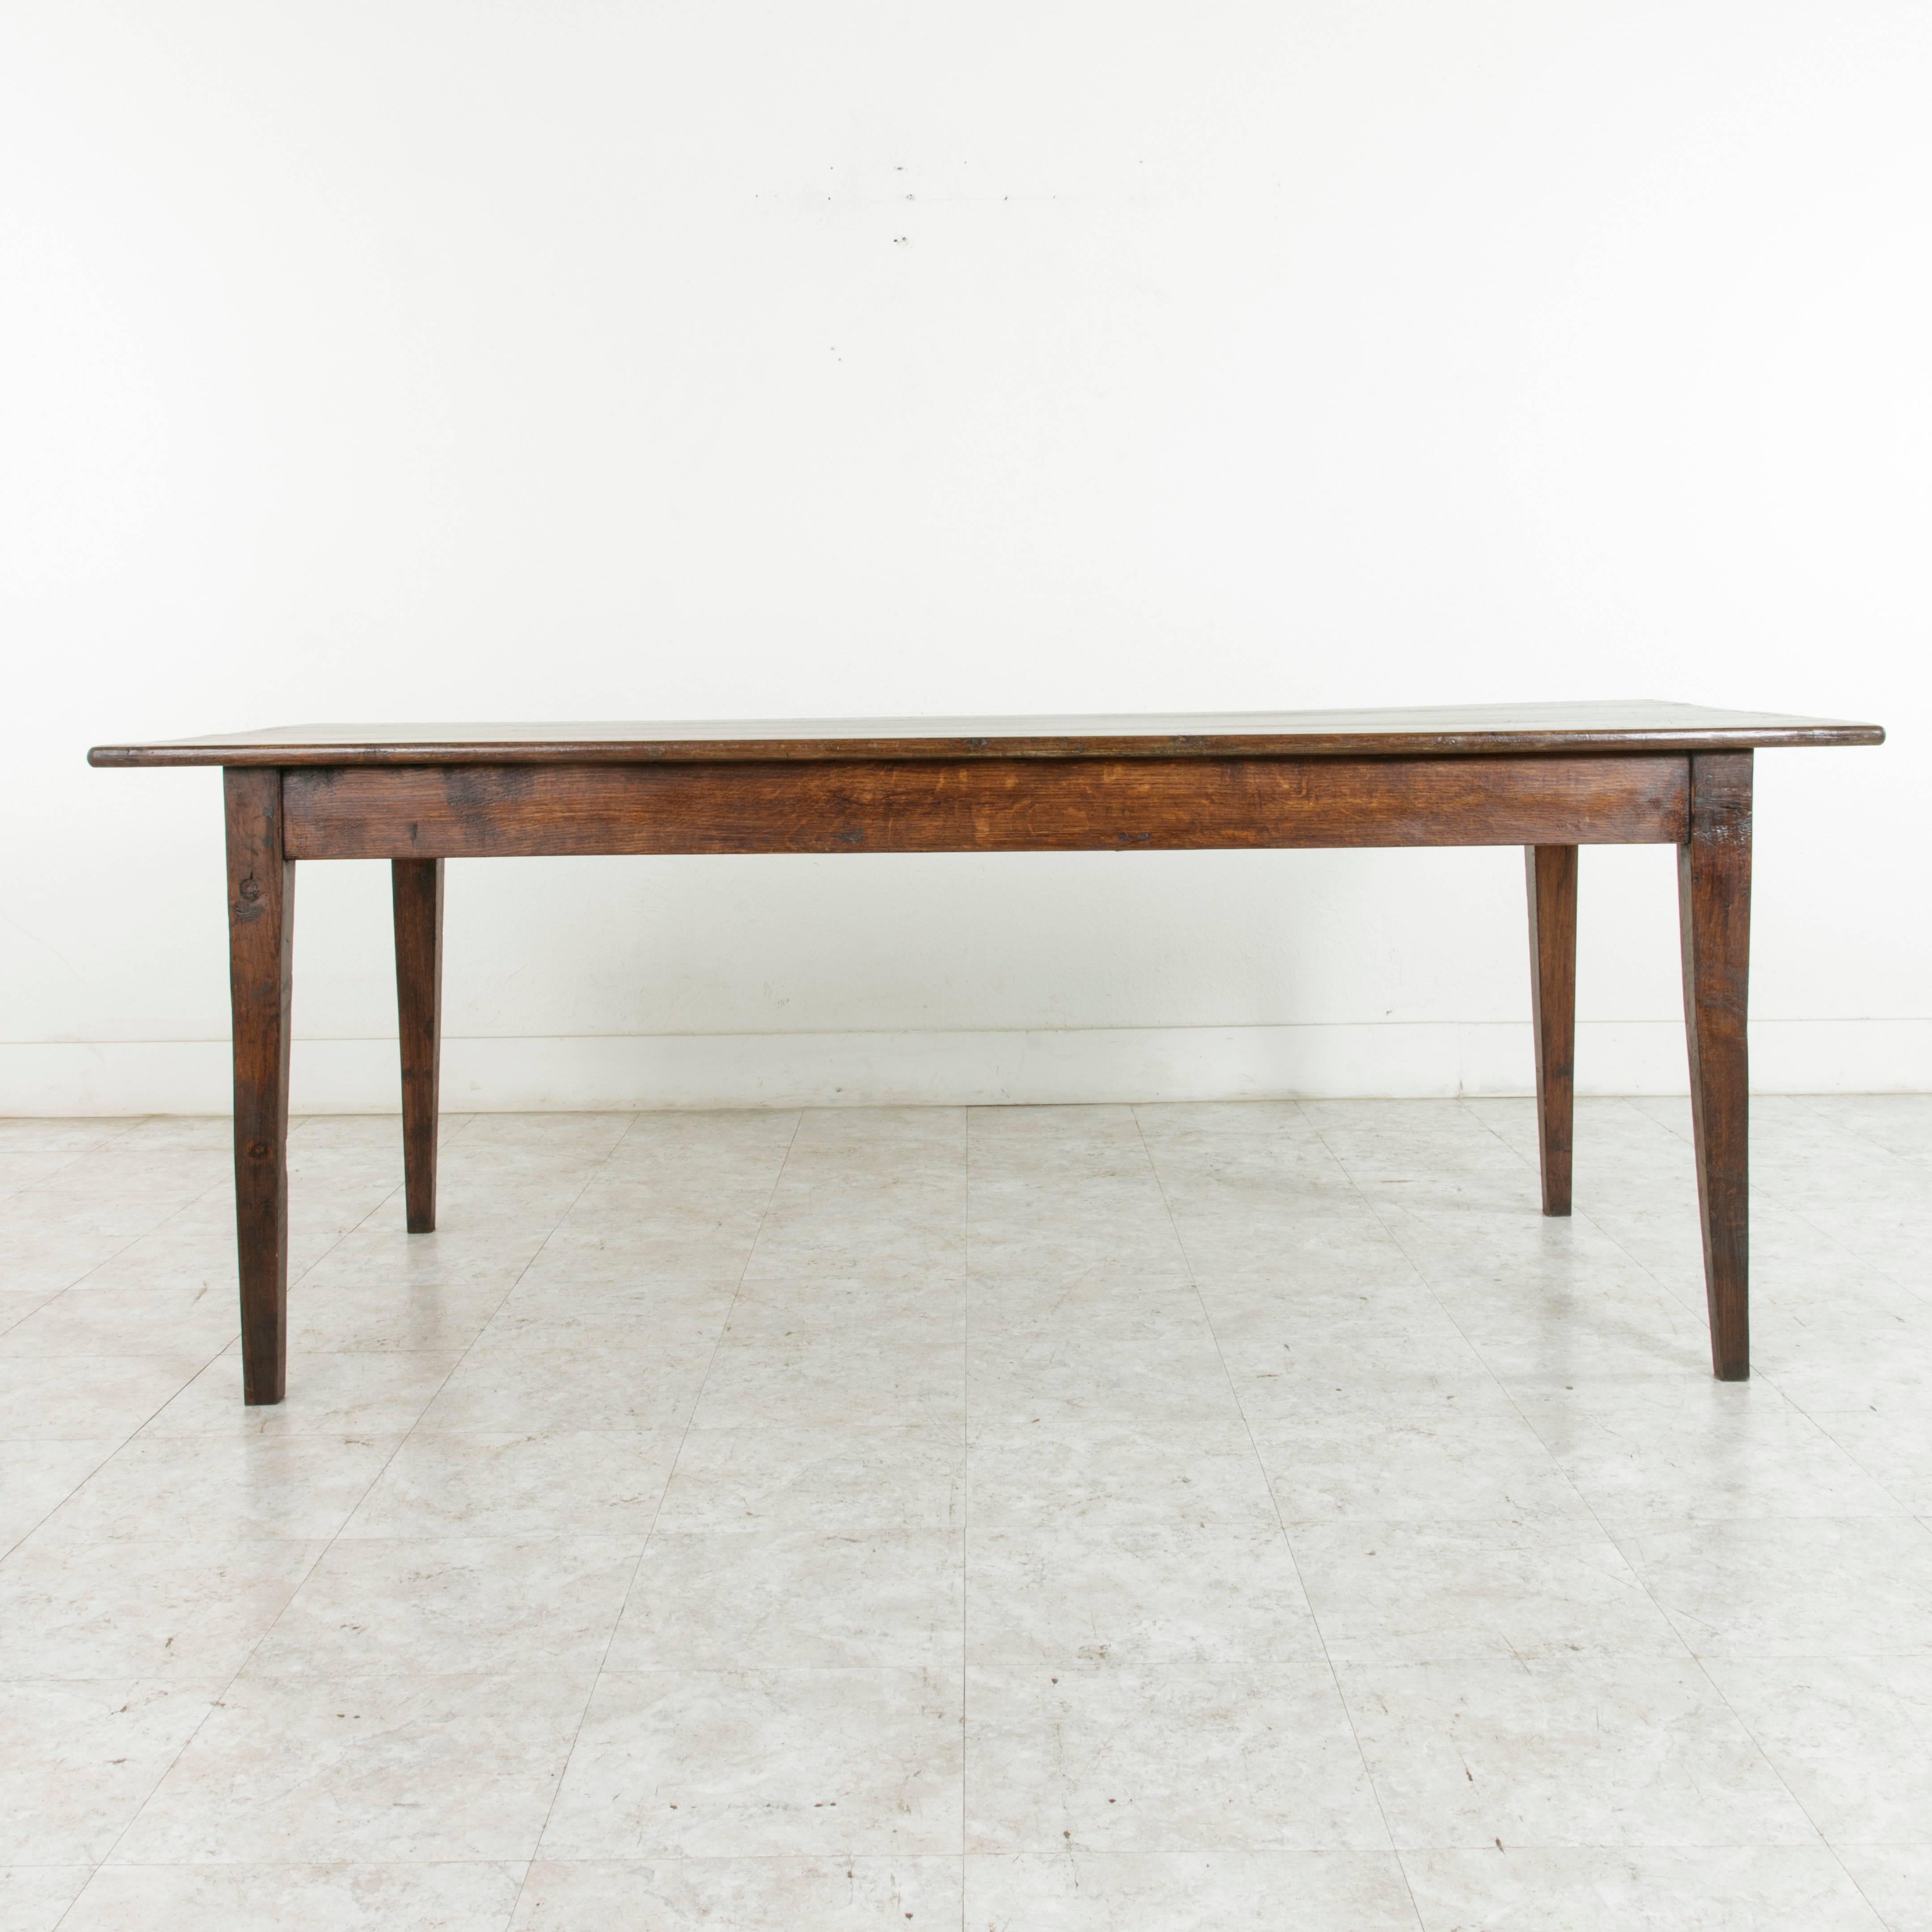 Early 20th Century French Hand-Carved Oak Farm Table or Dining Table with Single Drawer, circa 1900